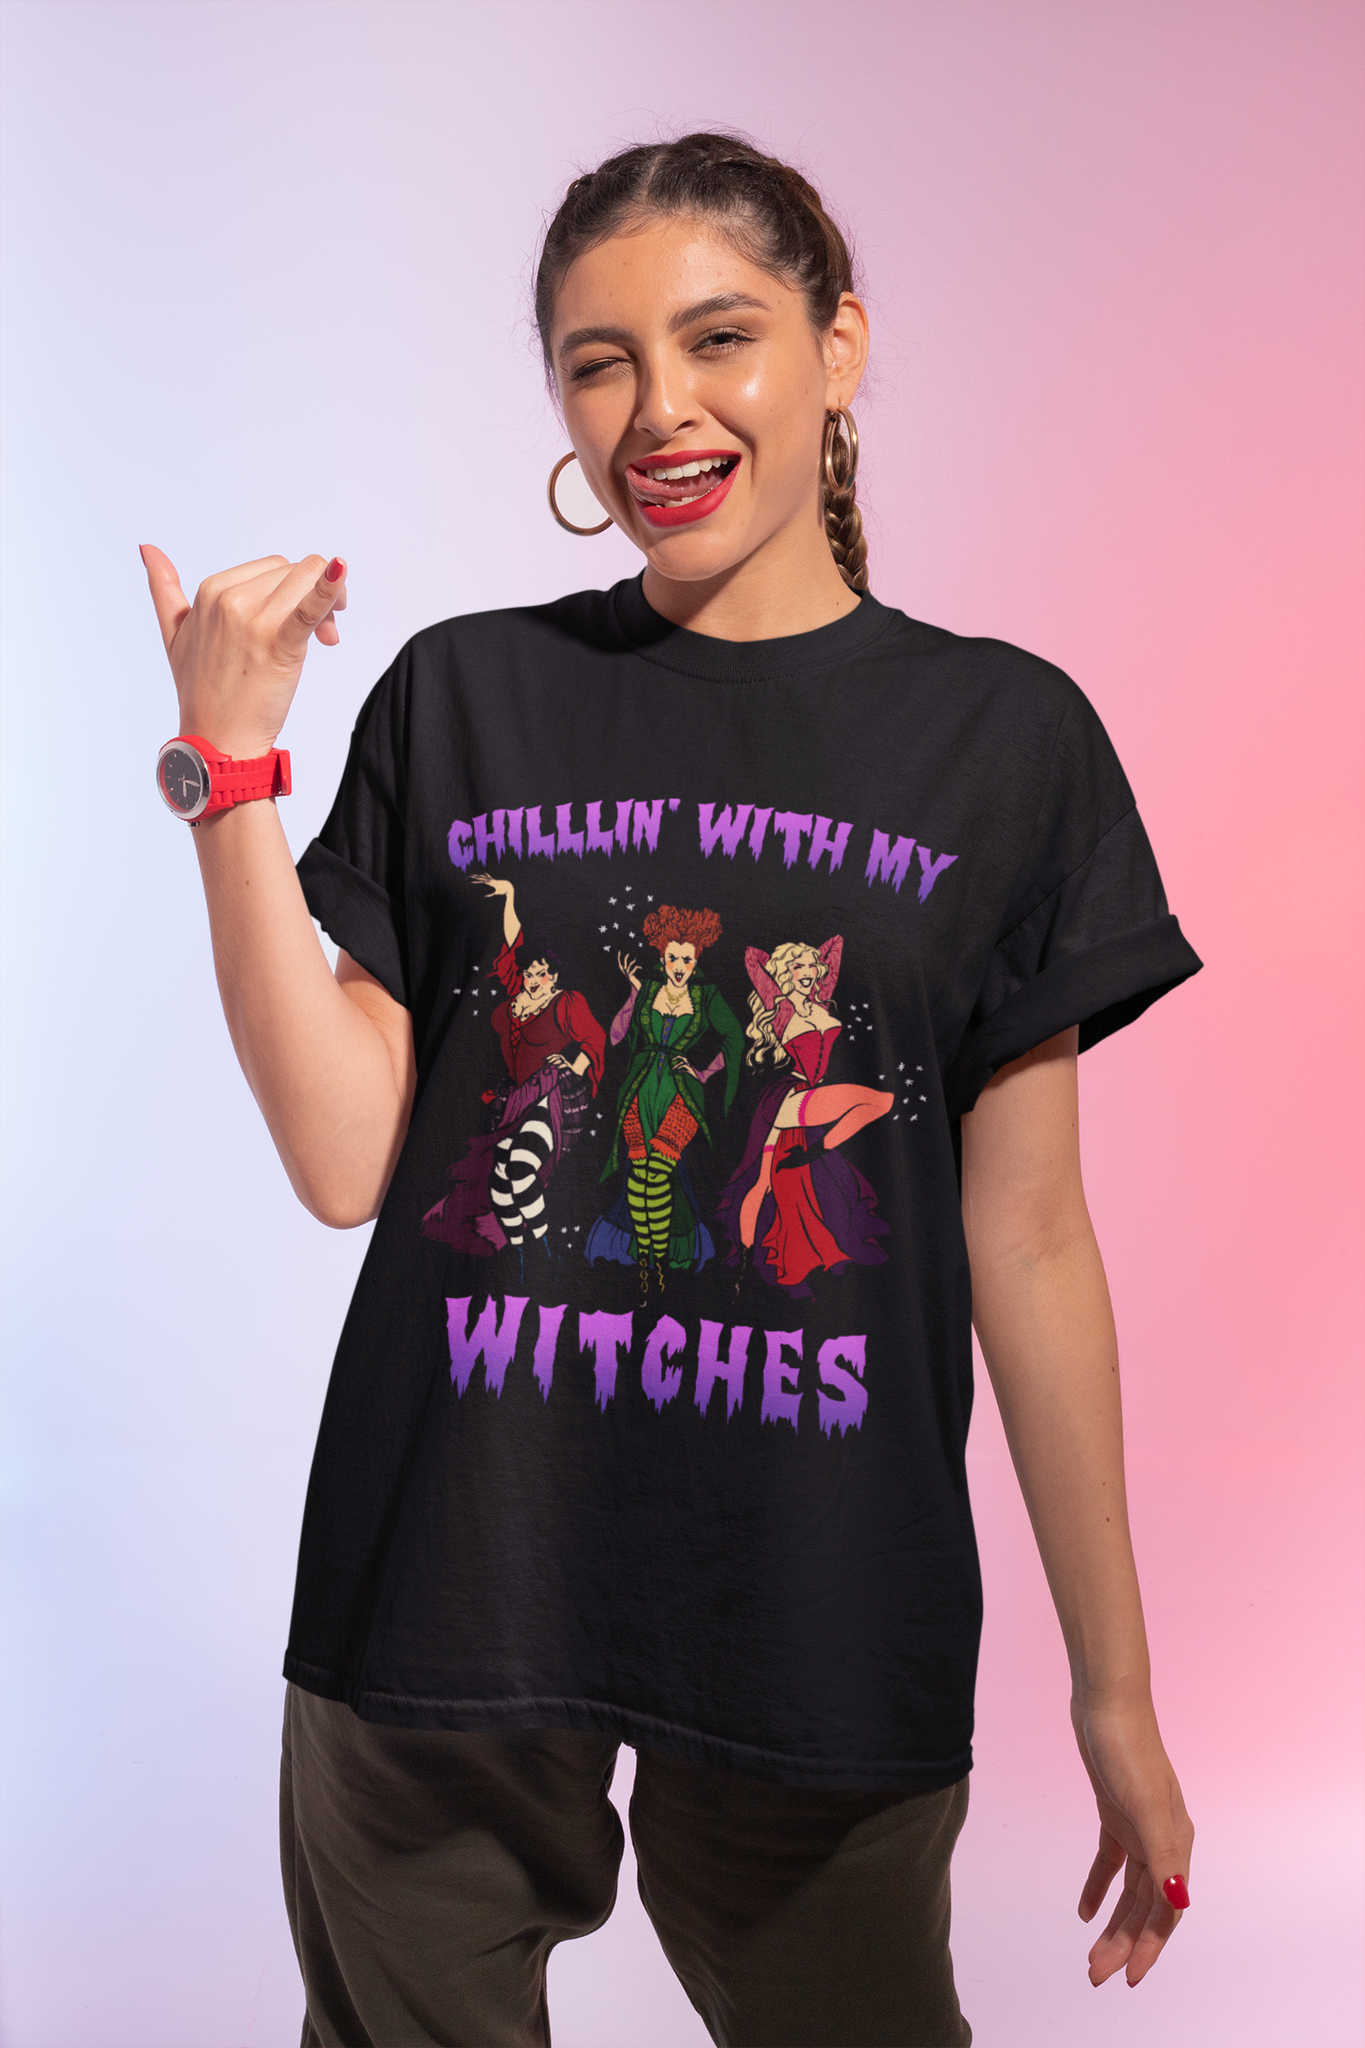 Hocus Pocus T Shirt, Winifred Sarah Mary Tshirt, Chillin With My Witches Shirt, Halloween Gifts